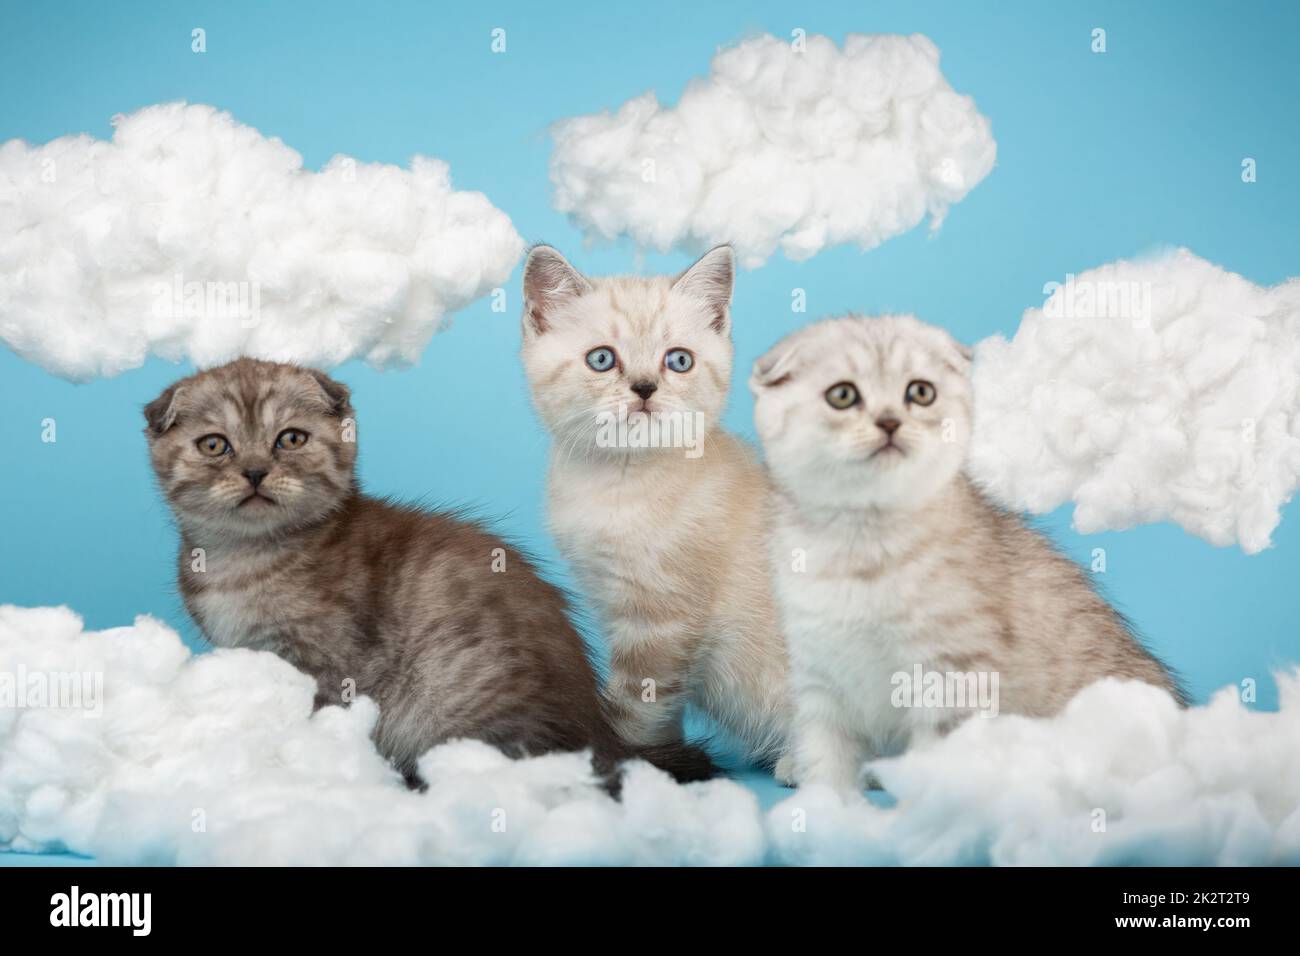 Scottish gray tabby kittens with different shades of fur and eyes on a blue background. Stock Photo